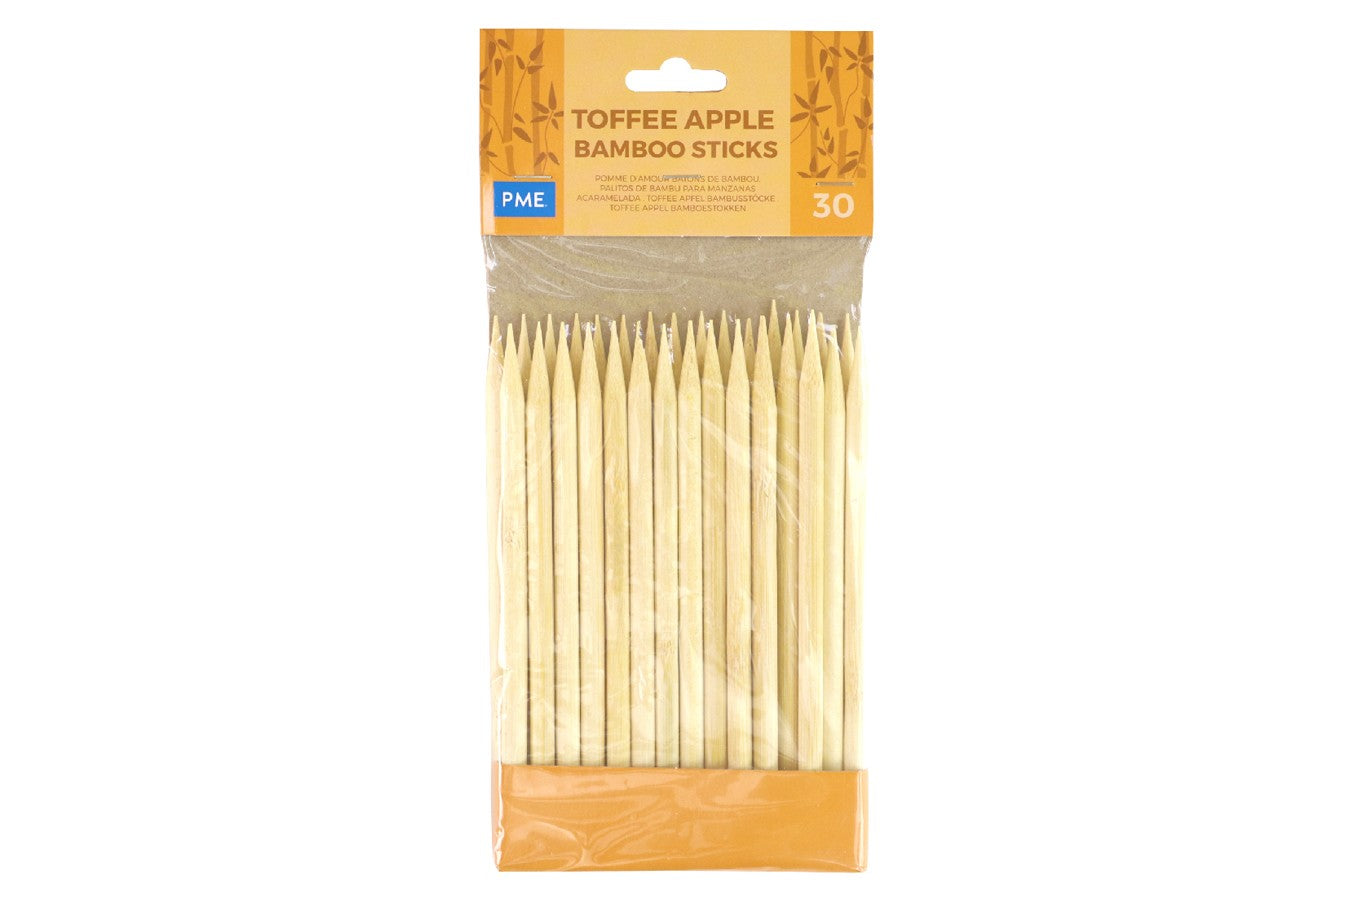 PME Toffee Apple Bamboo Sticks - Pack of 30 - Kate's Cupboard